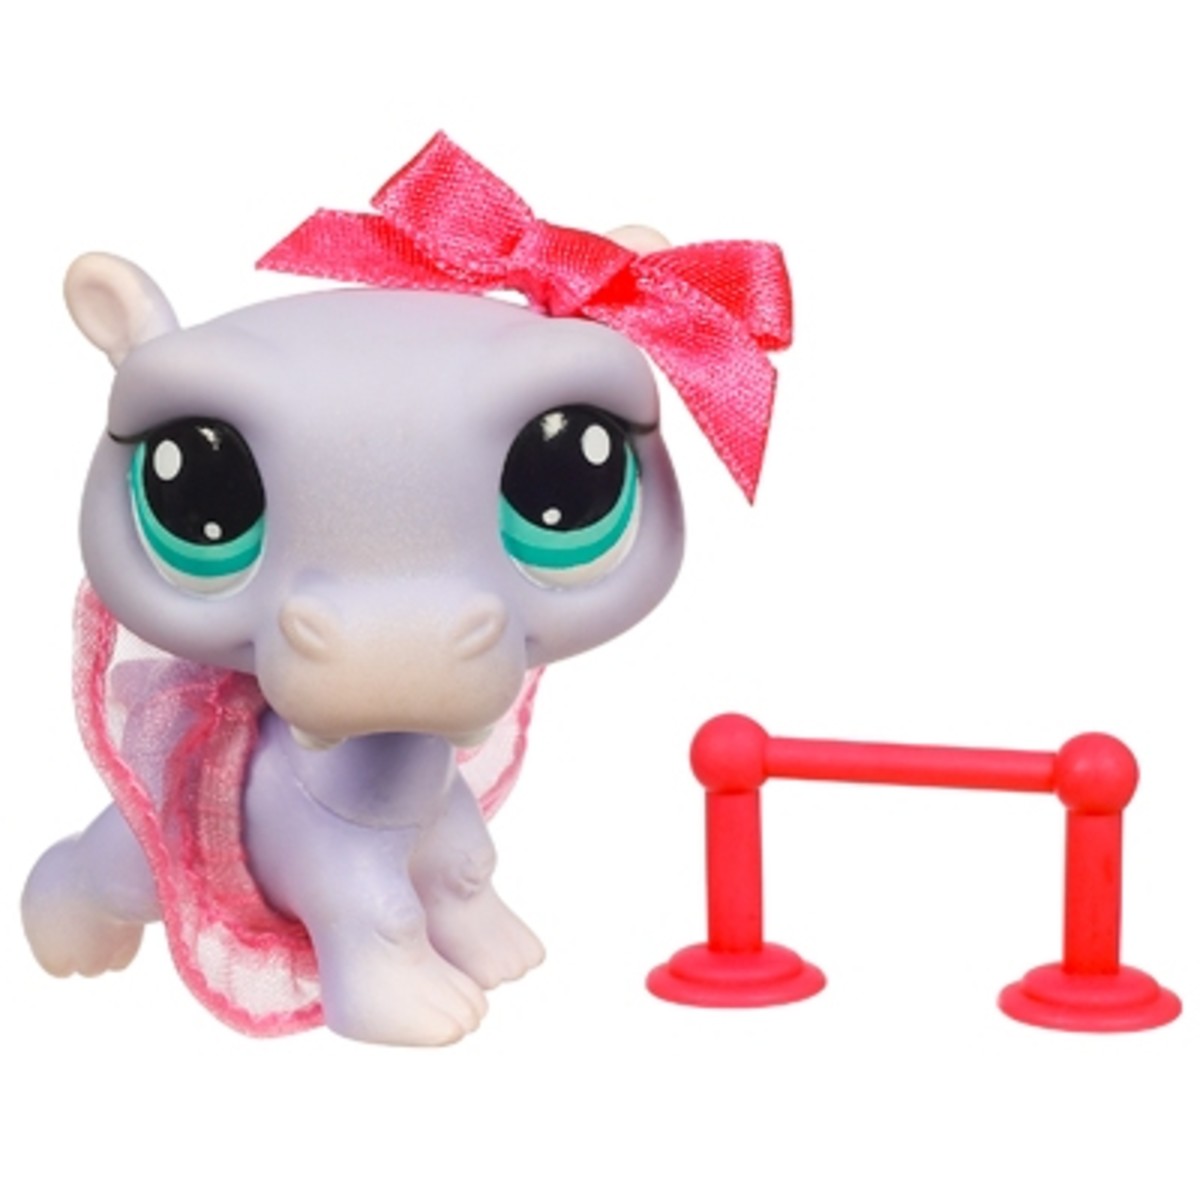 LPS Hippo is another Special Edition pet. 